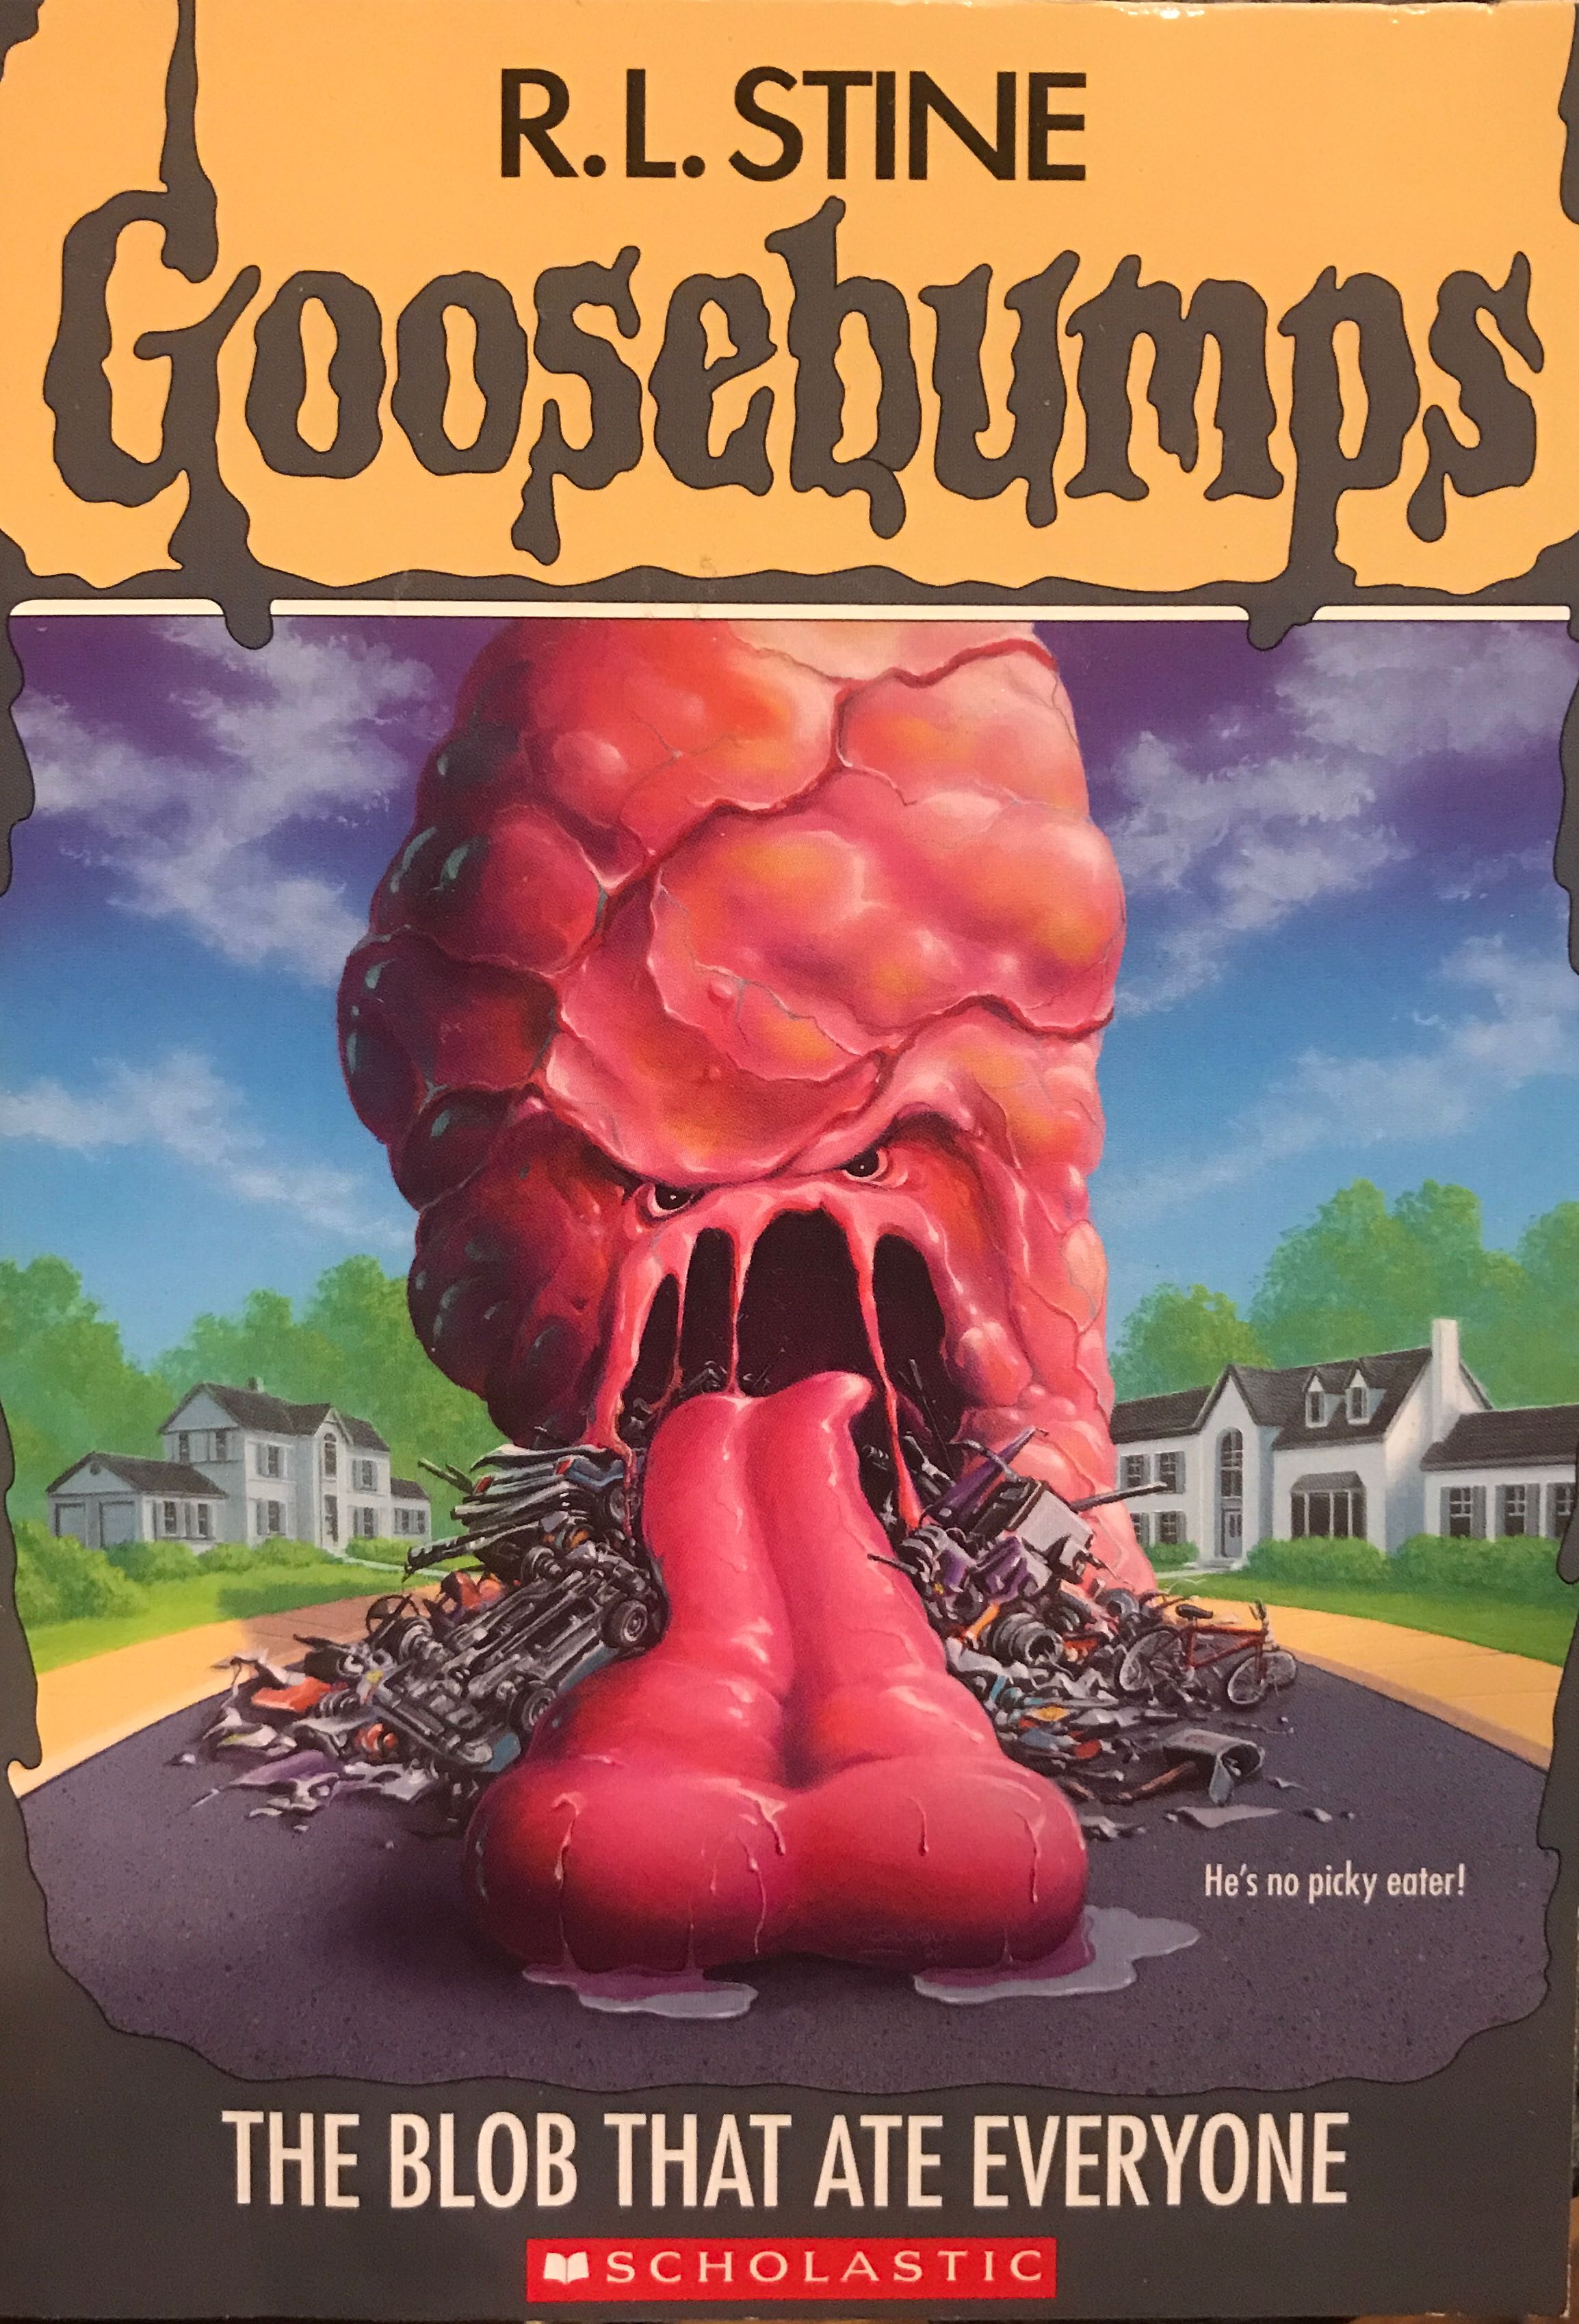 Goosebumps #55: The Blob That Ate Everyone - R.L. Stine (Scholastic Inc - Paperback) book collectible [Barcode 9780545904629] - Main Image 1